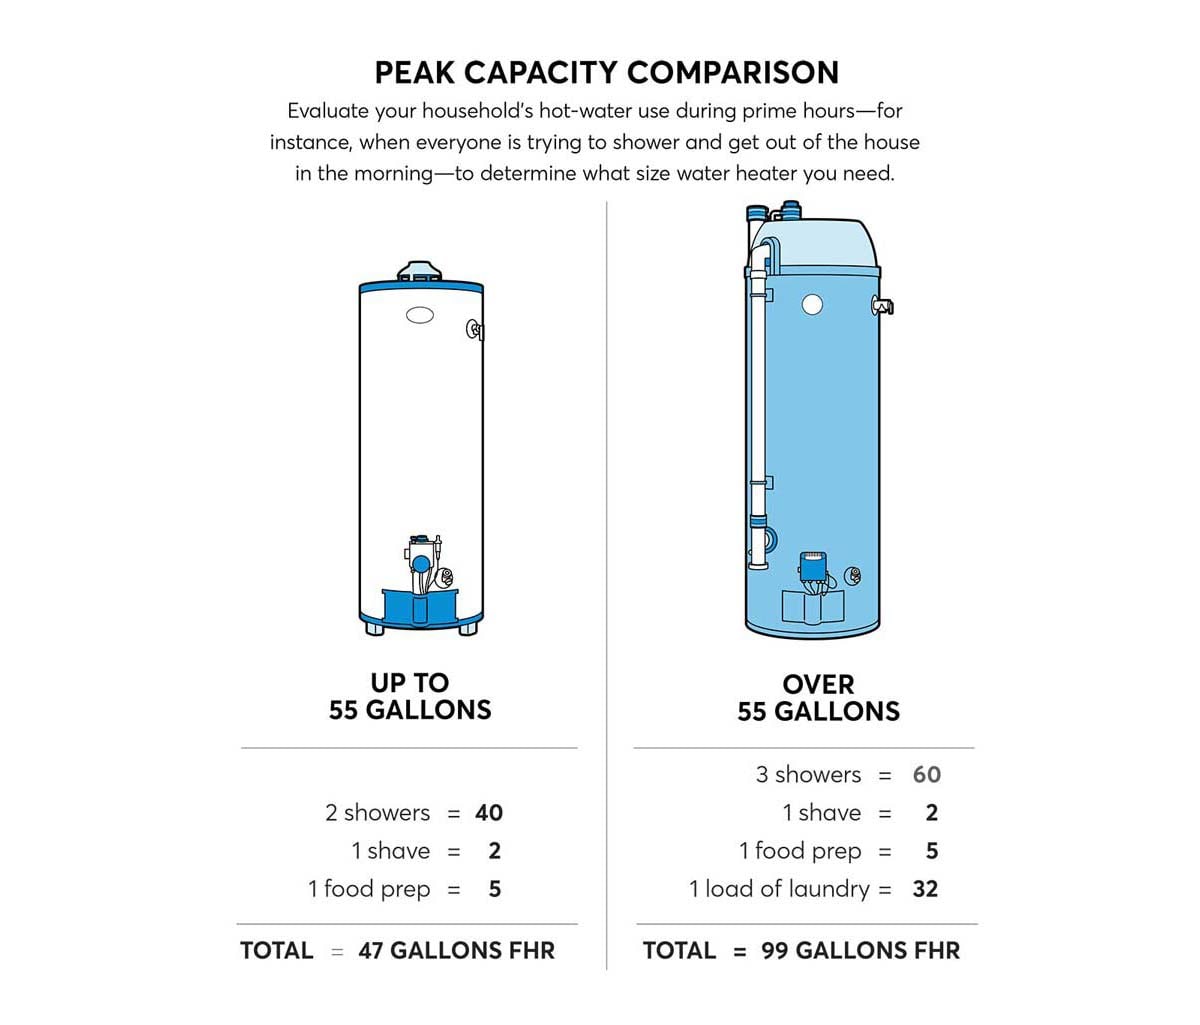 A peak capacity comparison between a small (up to 55 gallons) and large water heater (over 55 gallons).